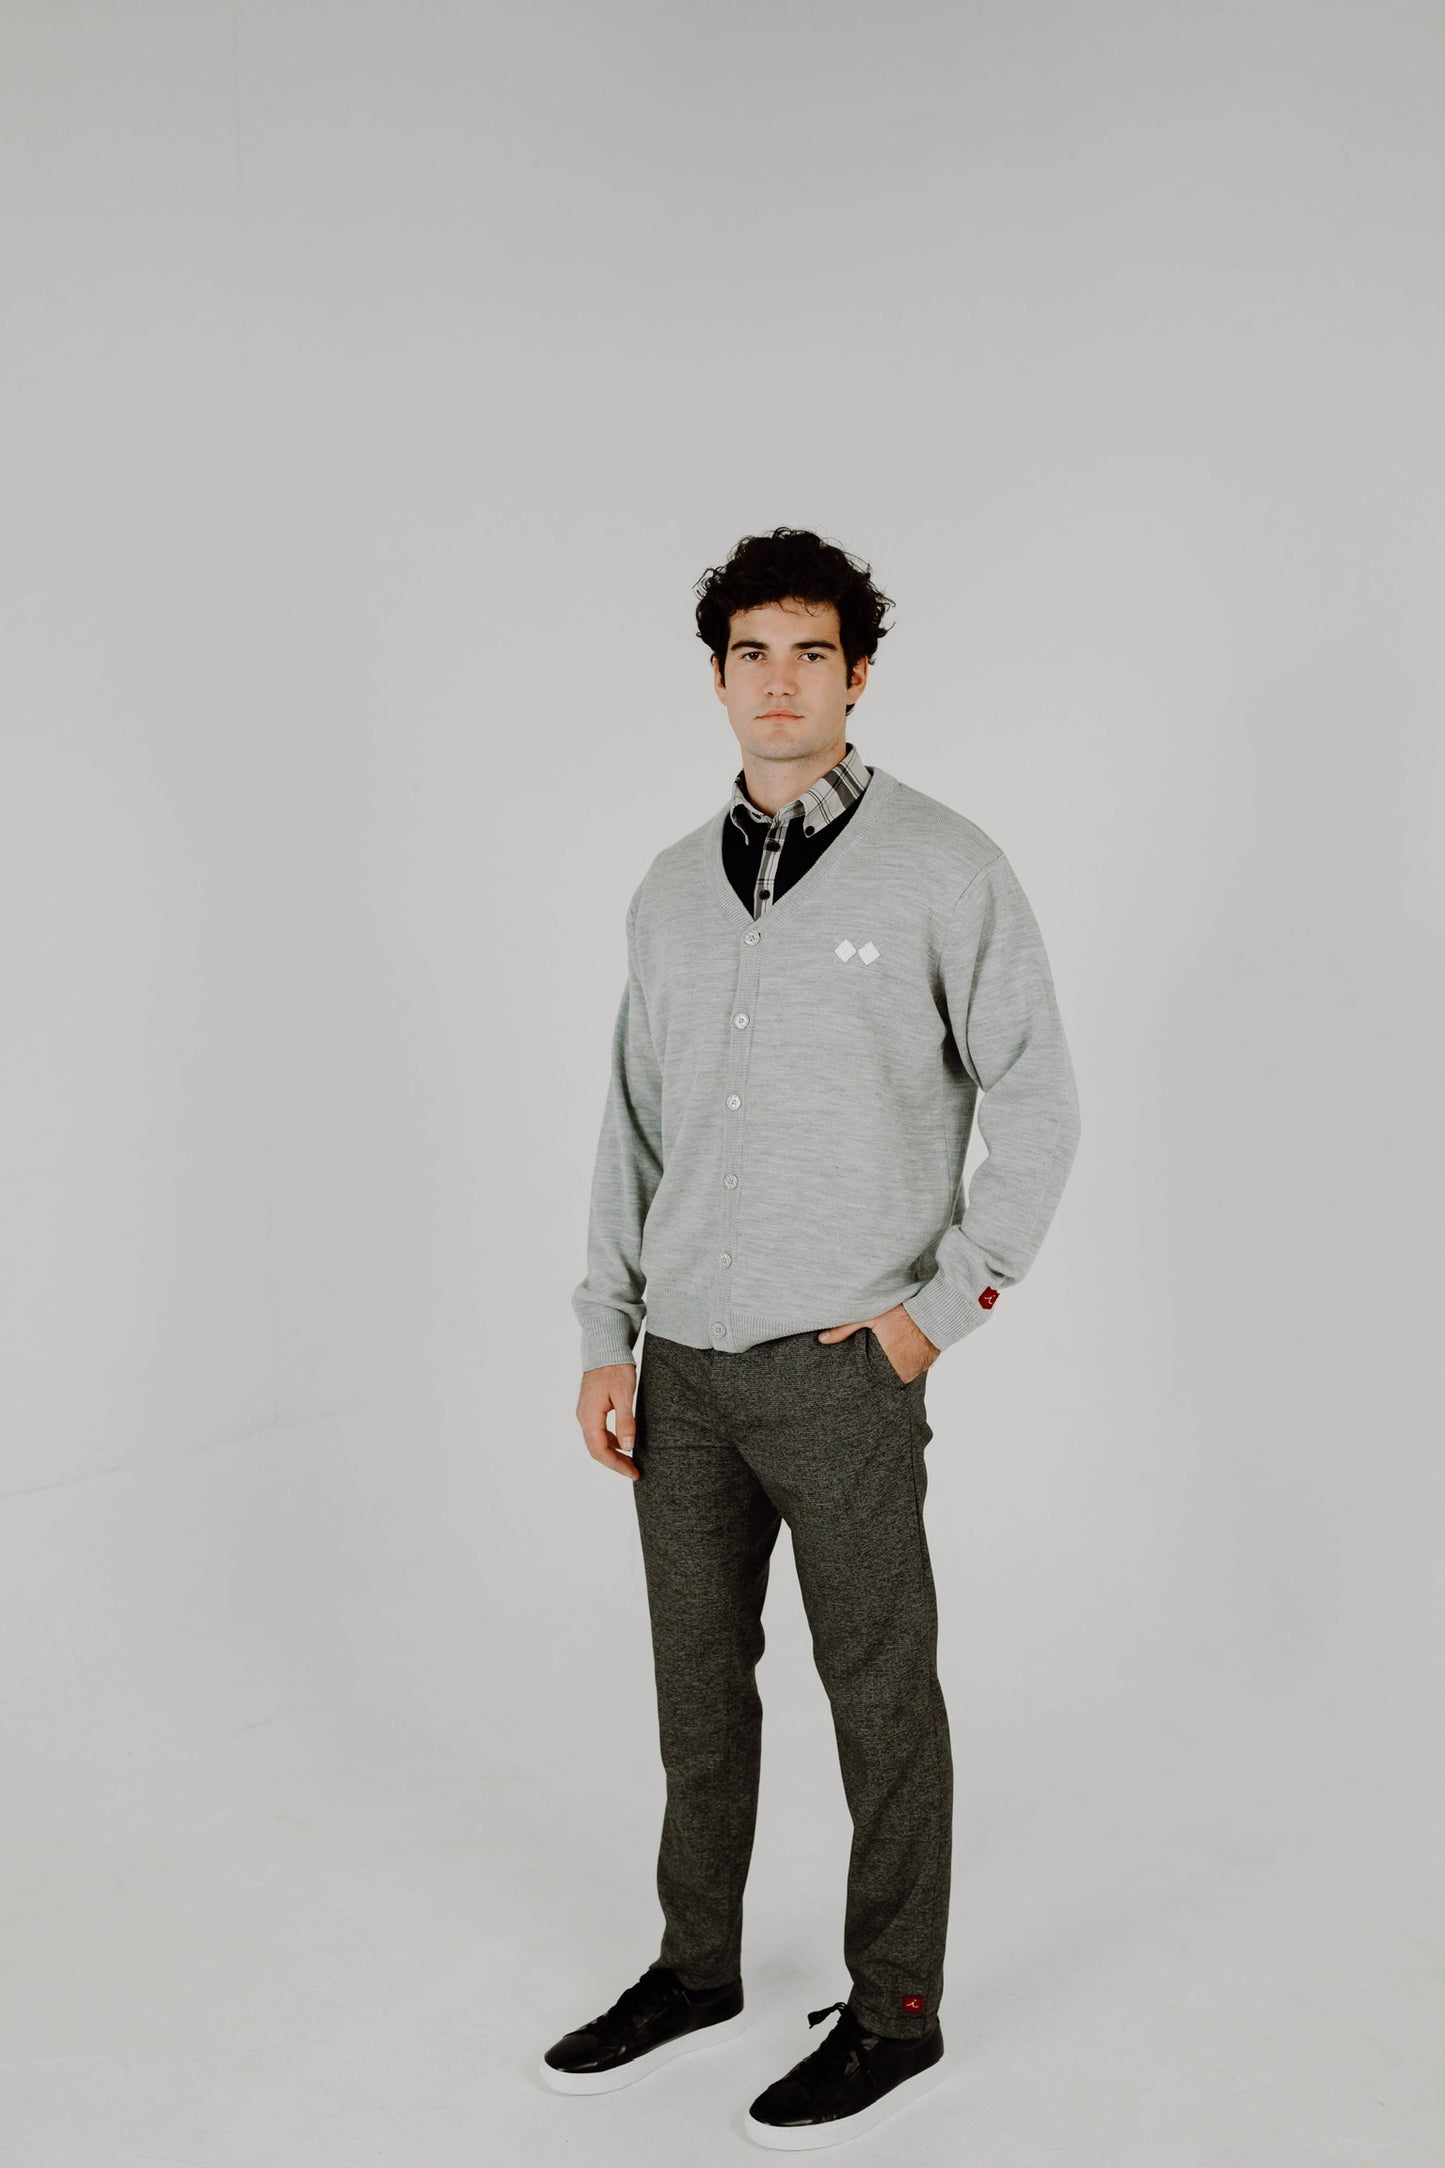 Clubhouse Cardigan: Steel Gray